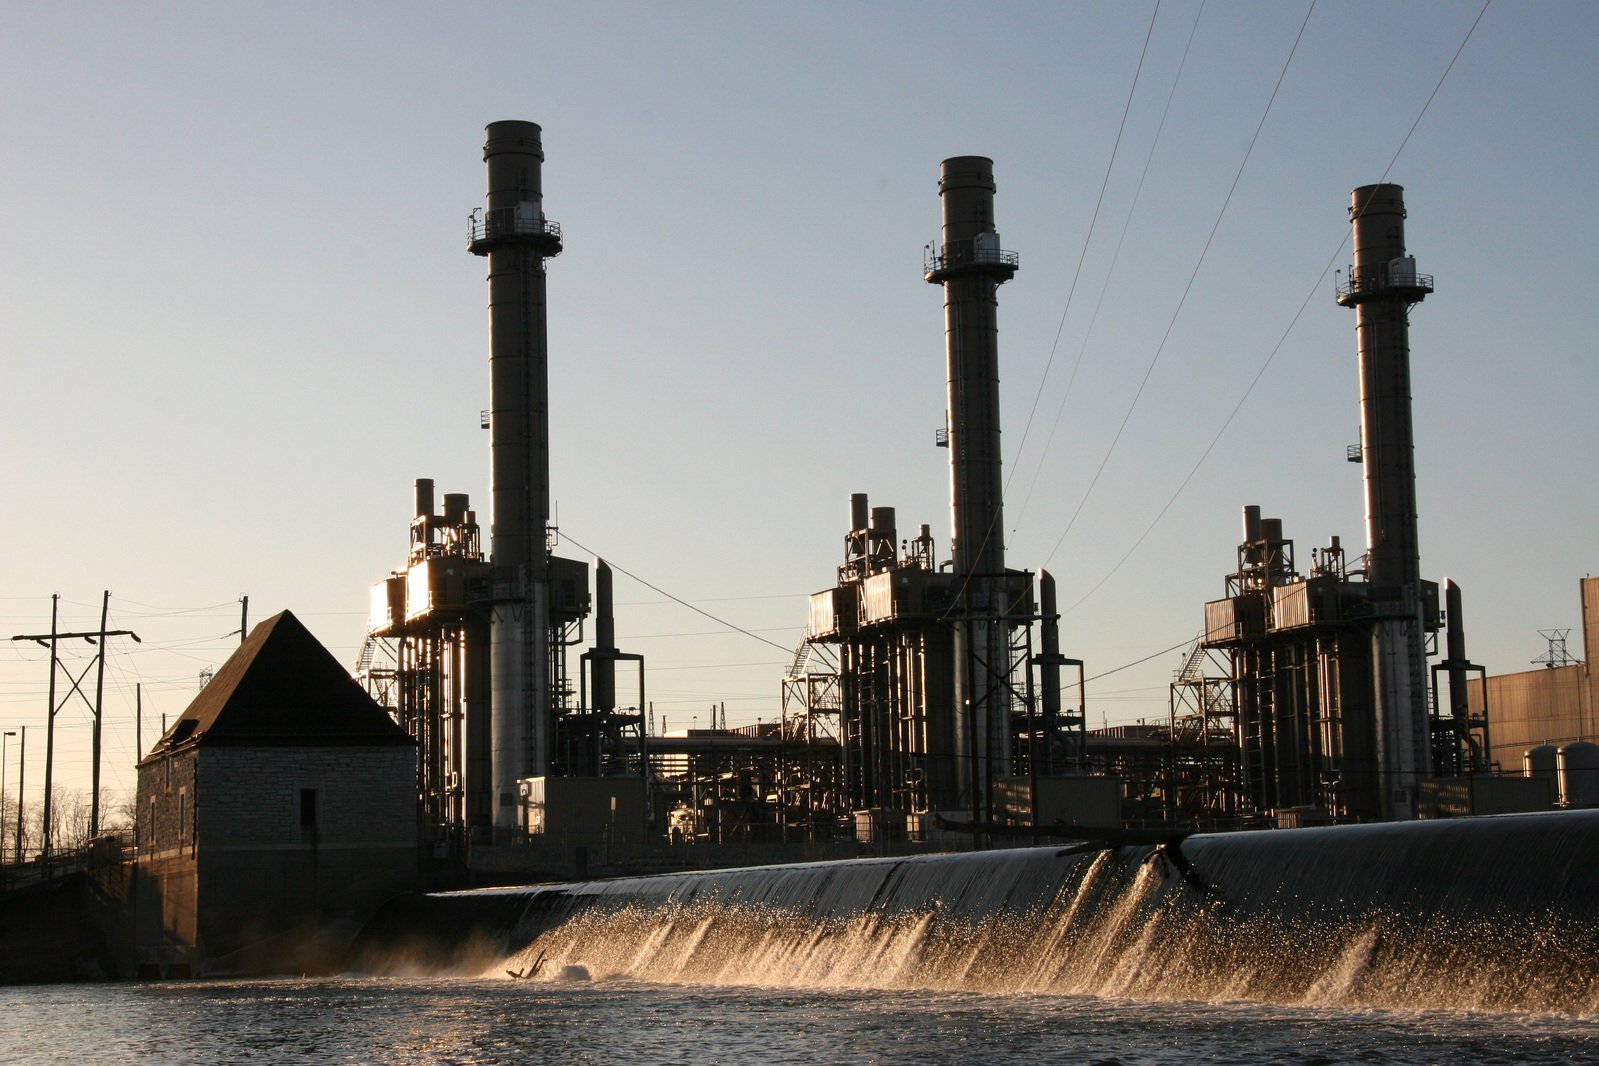 large industrial plants near the river with water